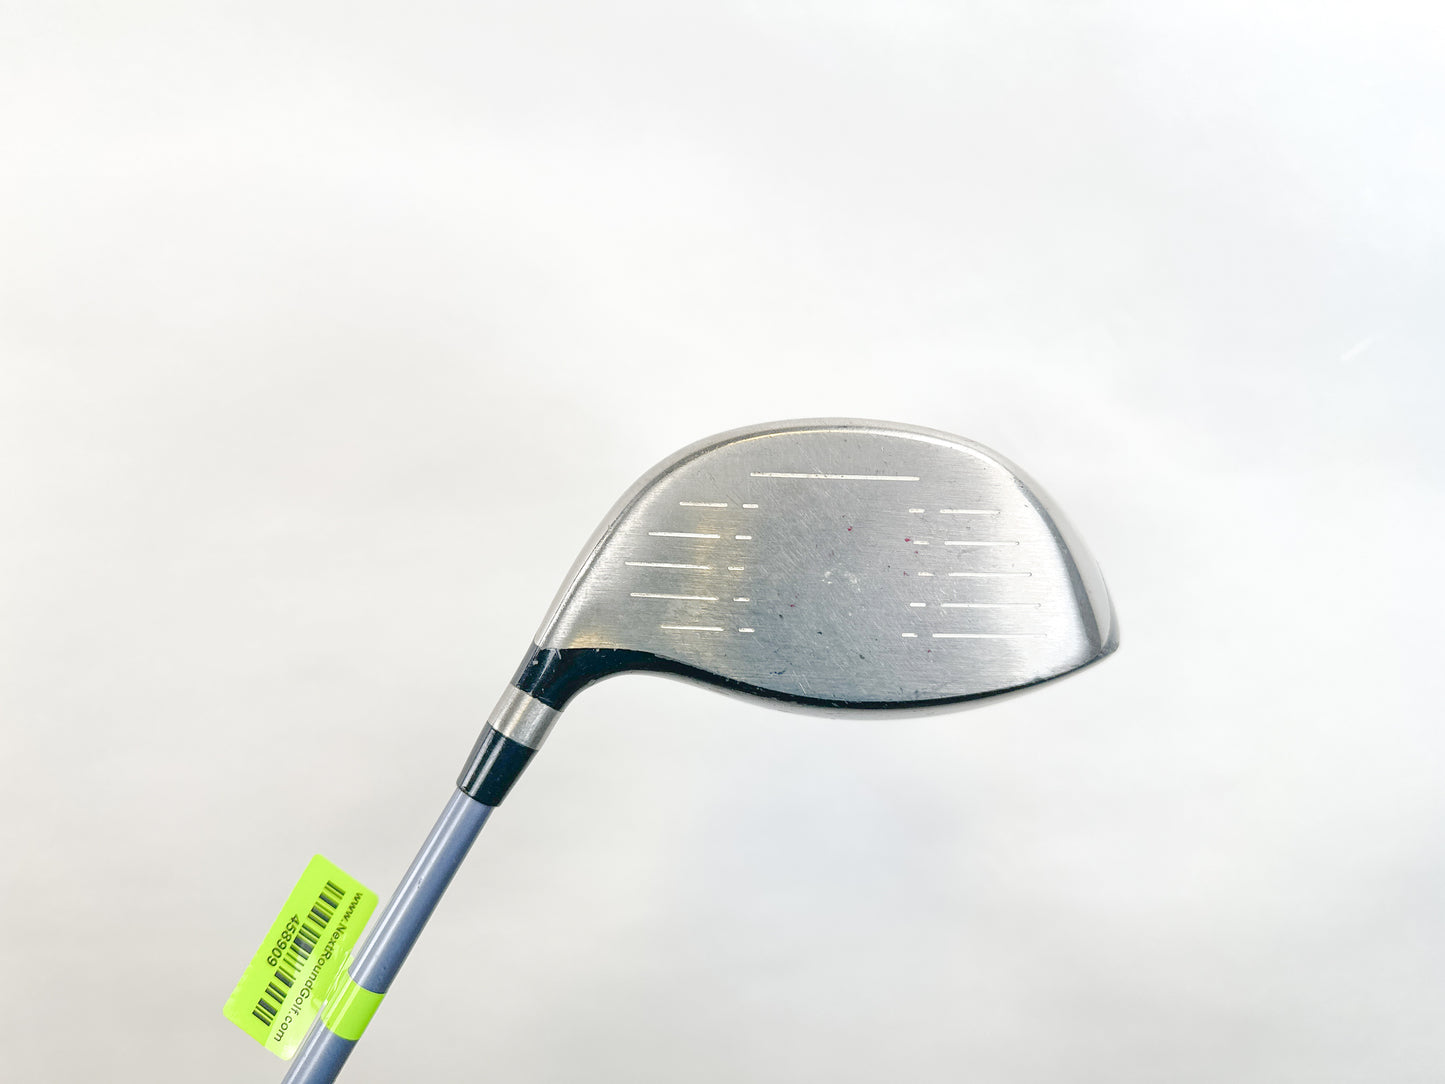 Used Ping G5 Driver - Right-Handed - 13.5 Degrees - Ladies Flex-Next Round